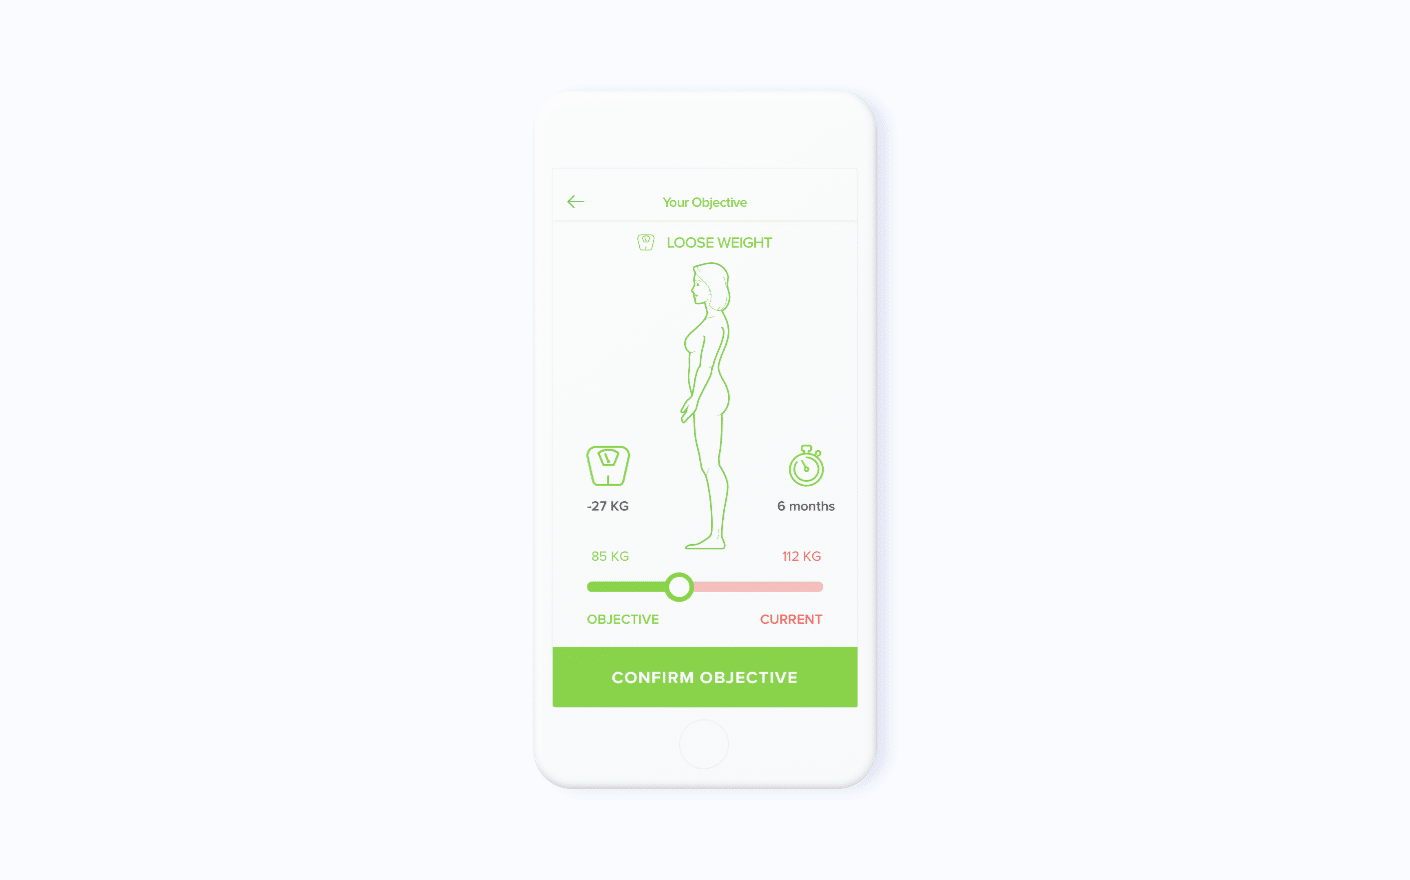 User interface of Herbalife Go - a meal planning app